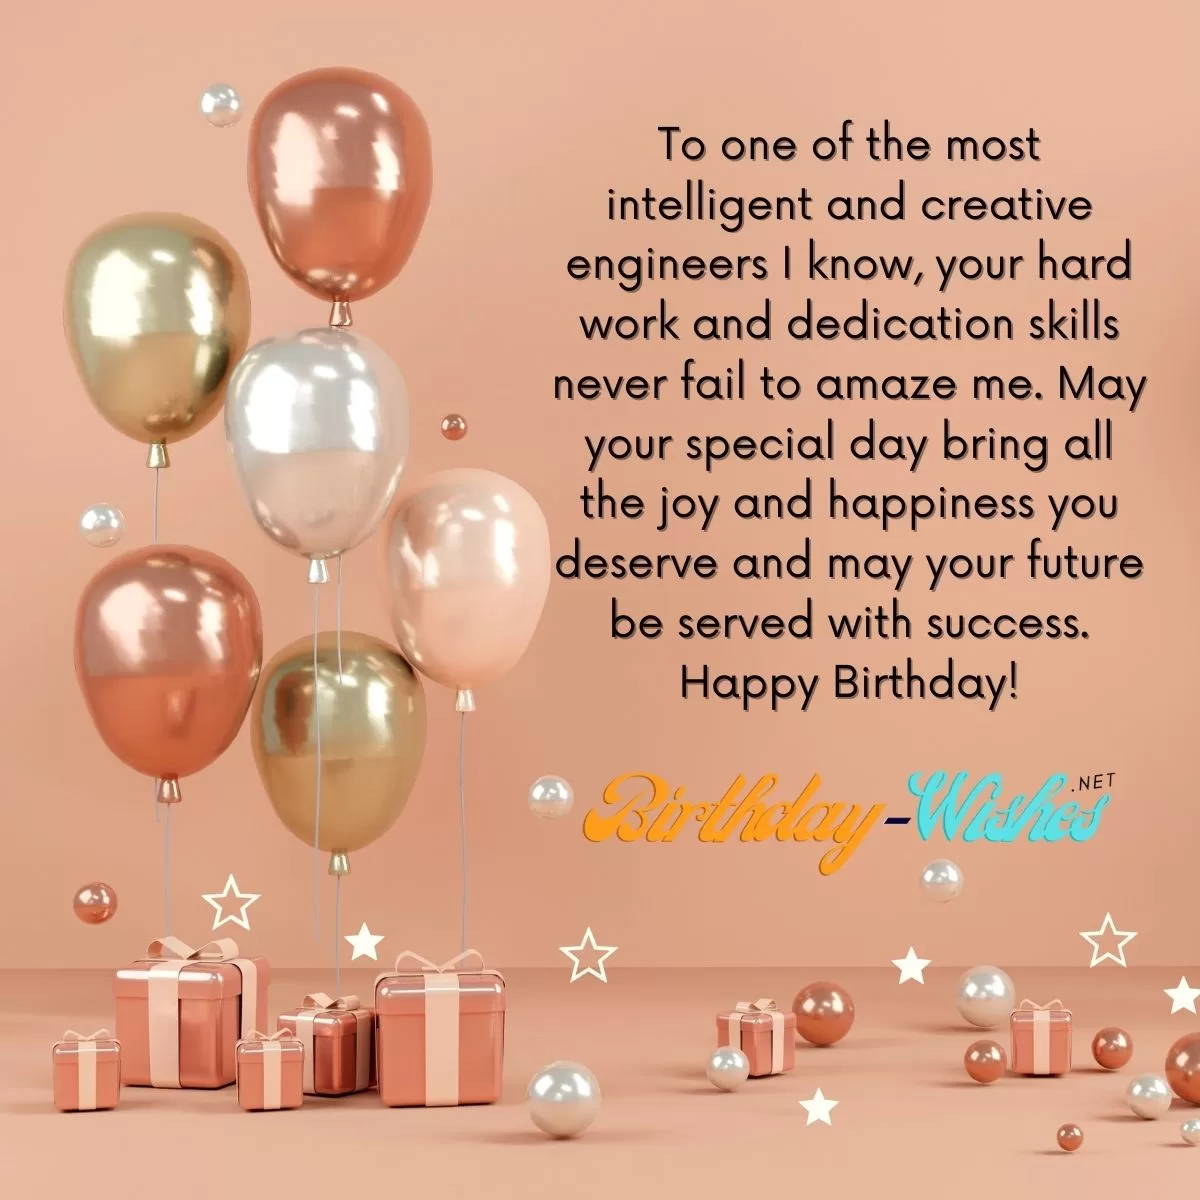 Emotional Birthday Messages for Engineers